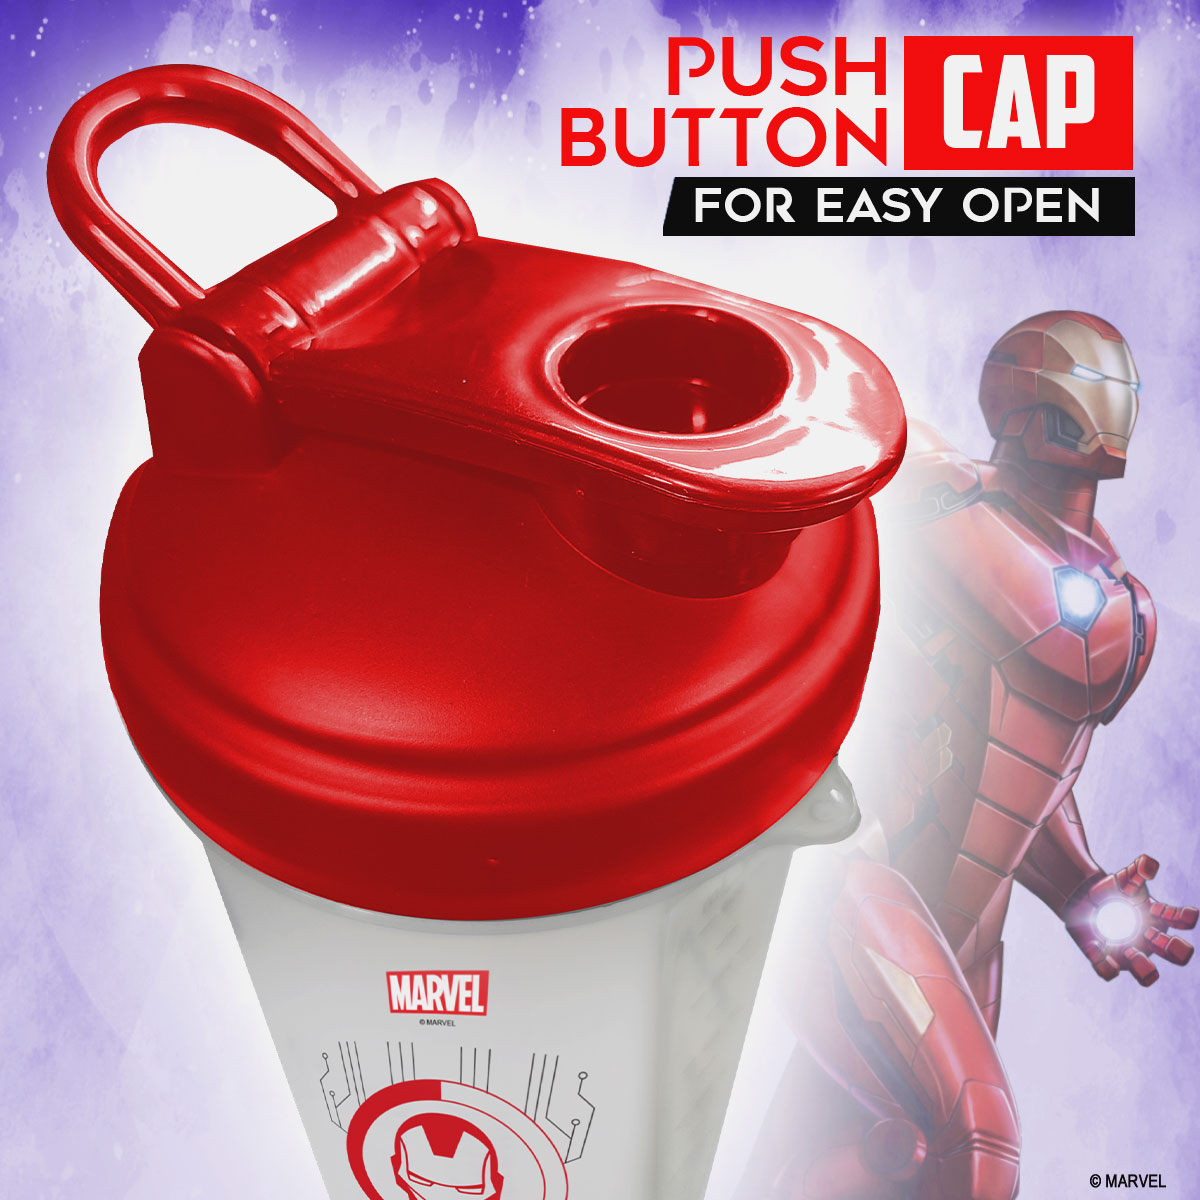 buy powermax x marvel msb-6s-im-clear (600ml) ironman marvel edition protein shaker bottle with single storage